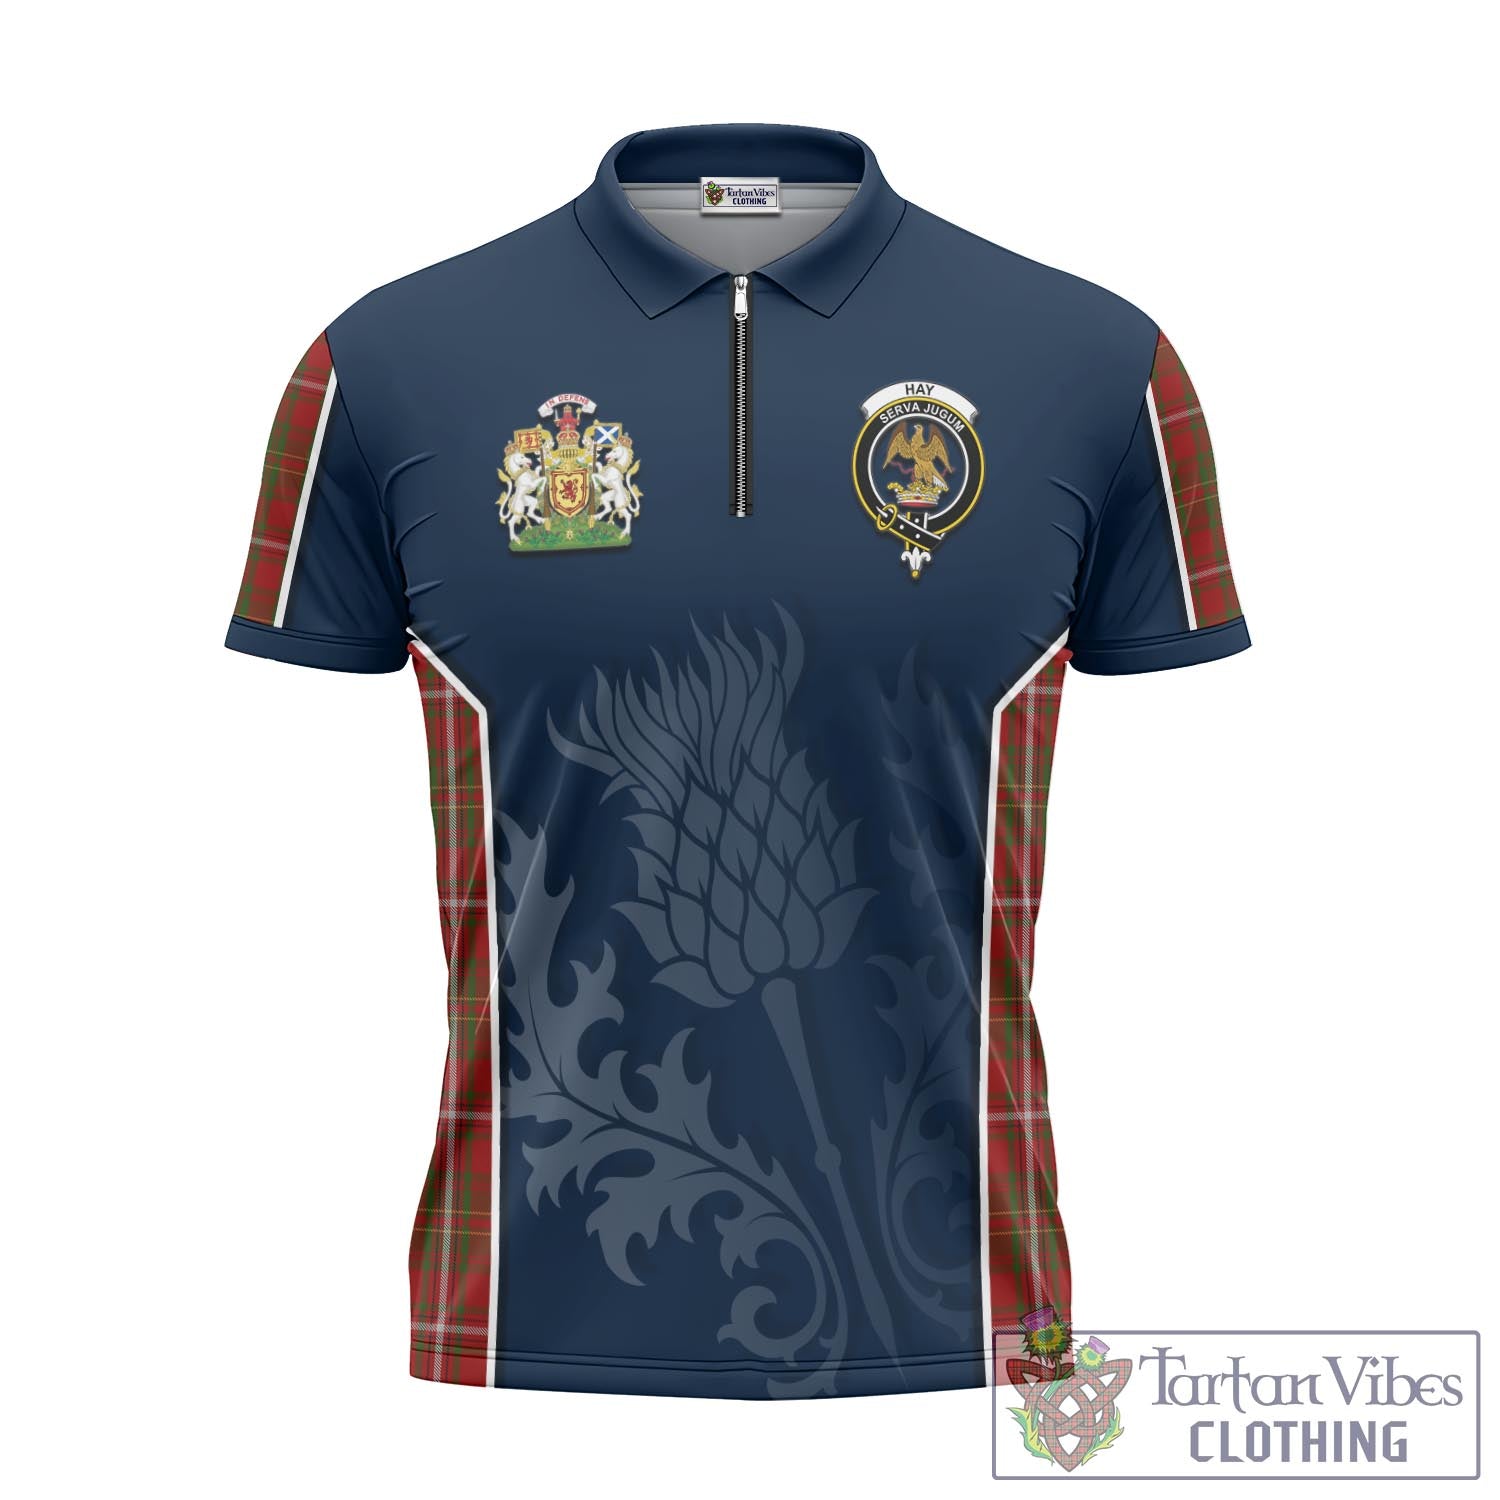 Tartan Vibes Clothing Hay Tartan Zipper Polo Shirt with Family Crest and Scottish Thistle Vibes Sport Style